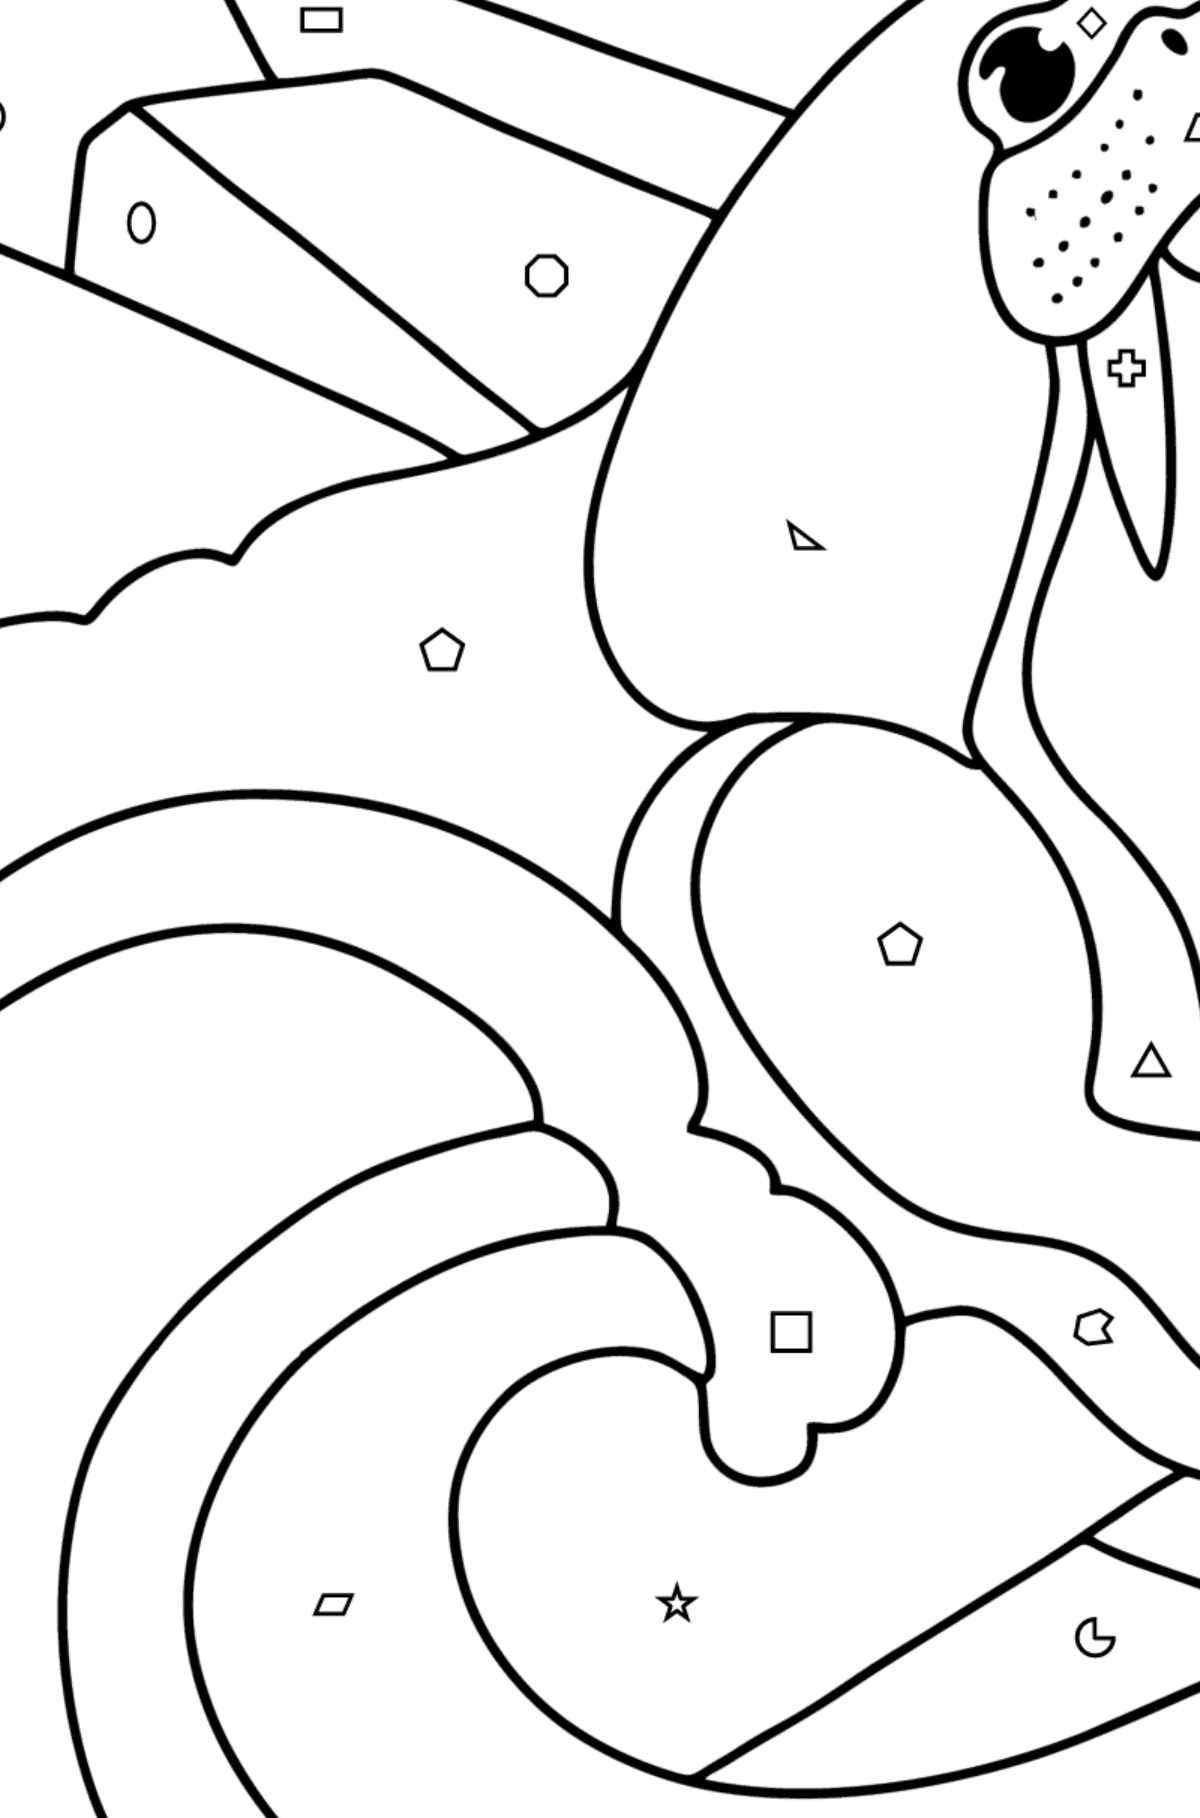 Atlantic Walrus coloring page - Coloring by Geometric Shapes for Kids